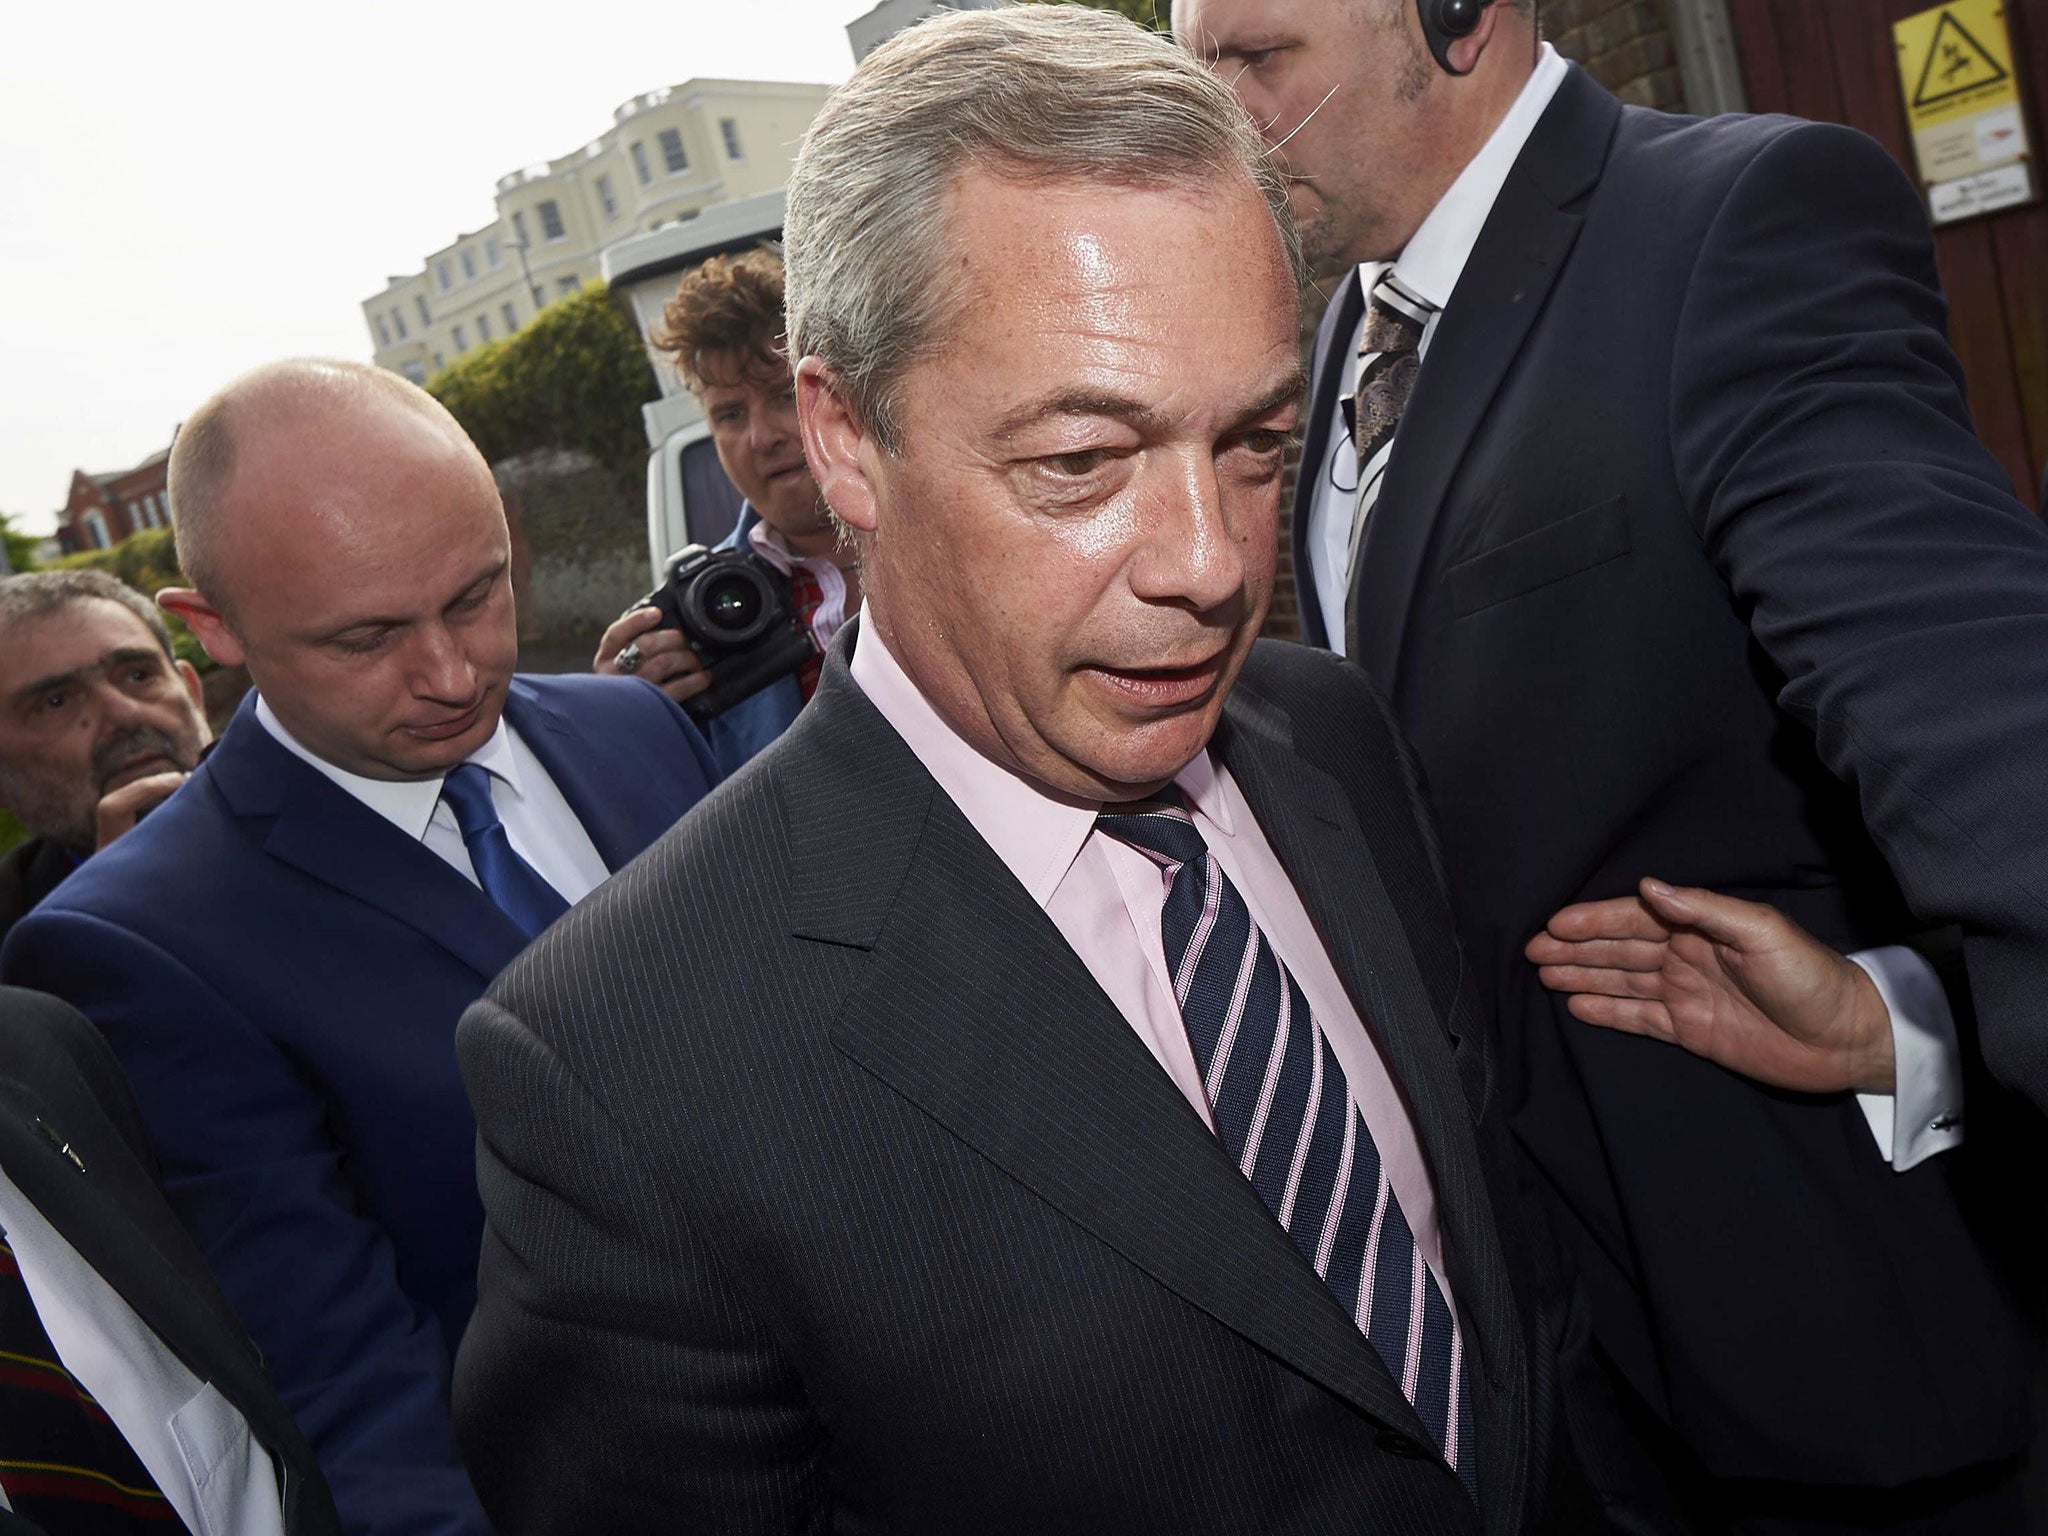 UK Independence Party (UKIP) leader Nigel Farage arrives at a counting centre in Margate